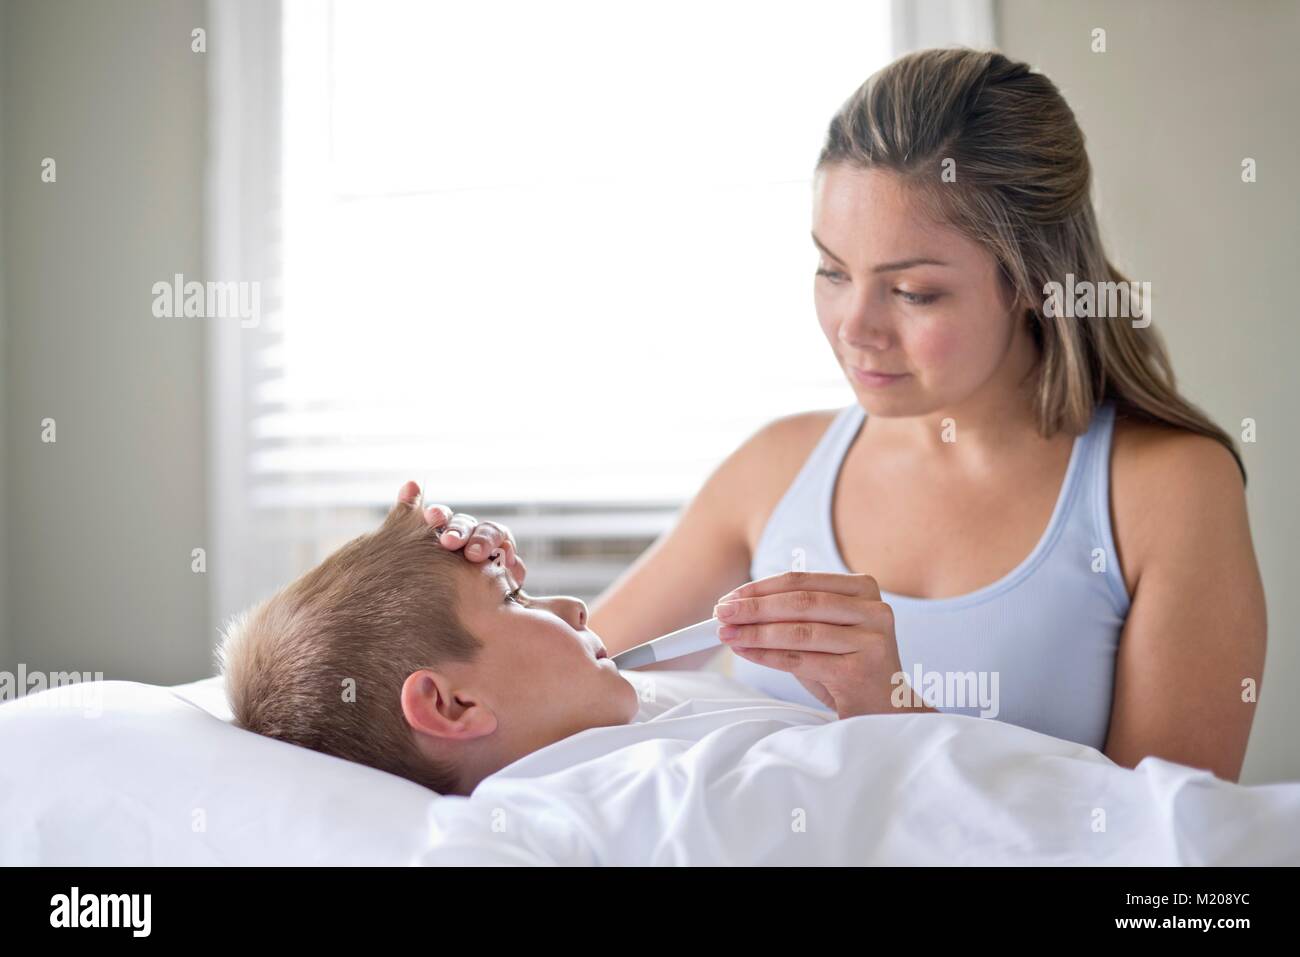 Mother taking son's temperature in bed. Stock Photo